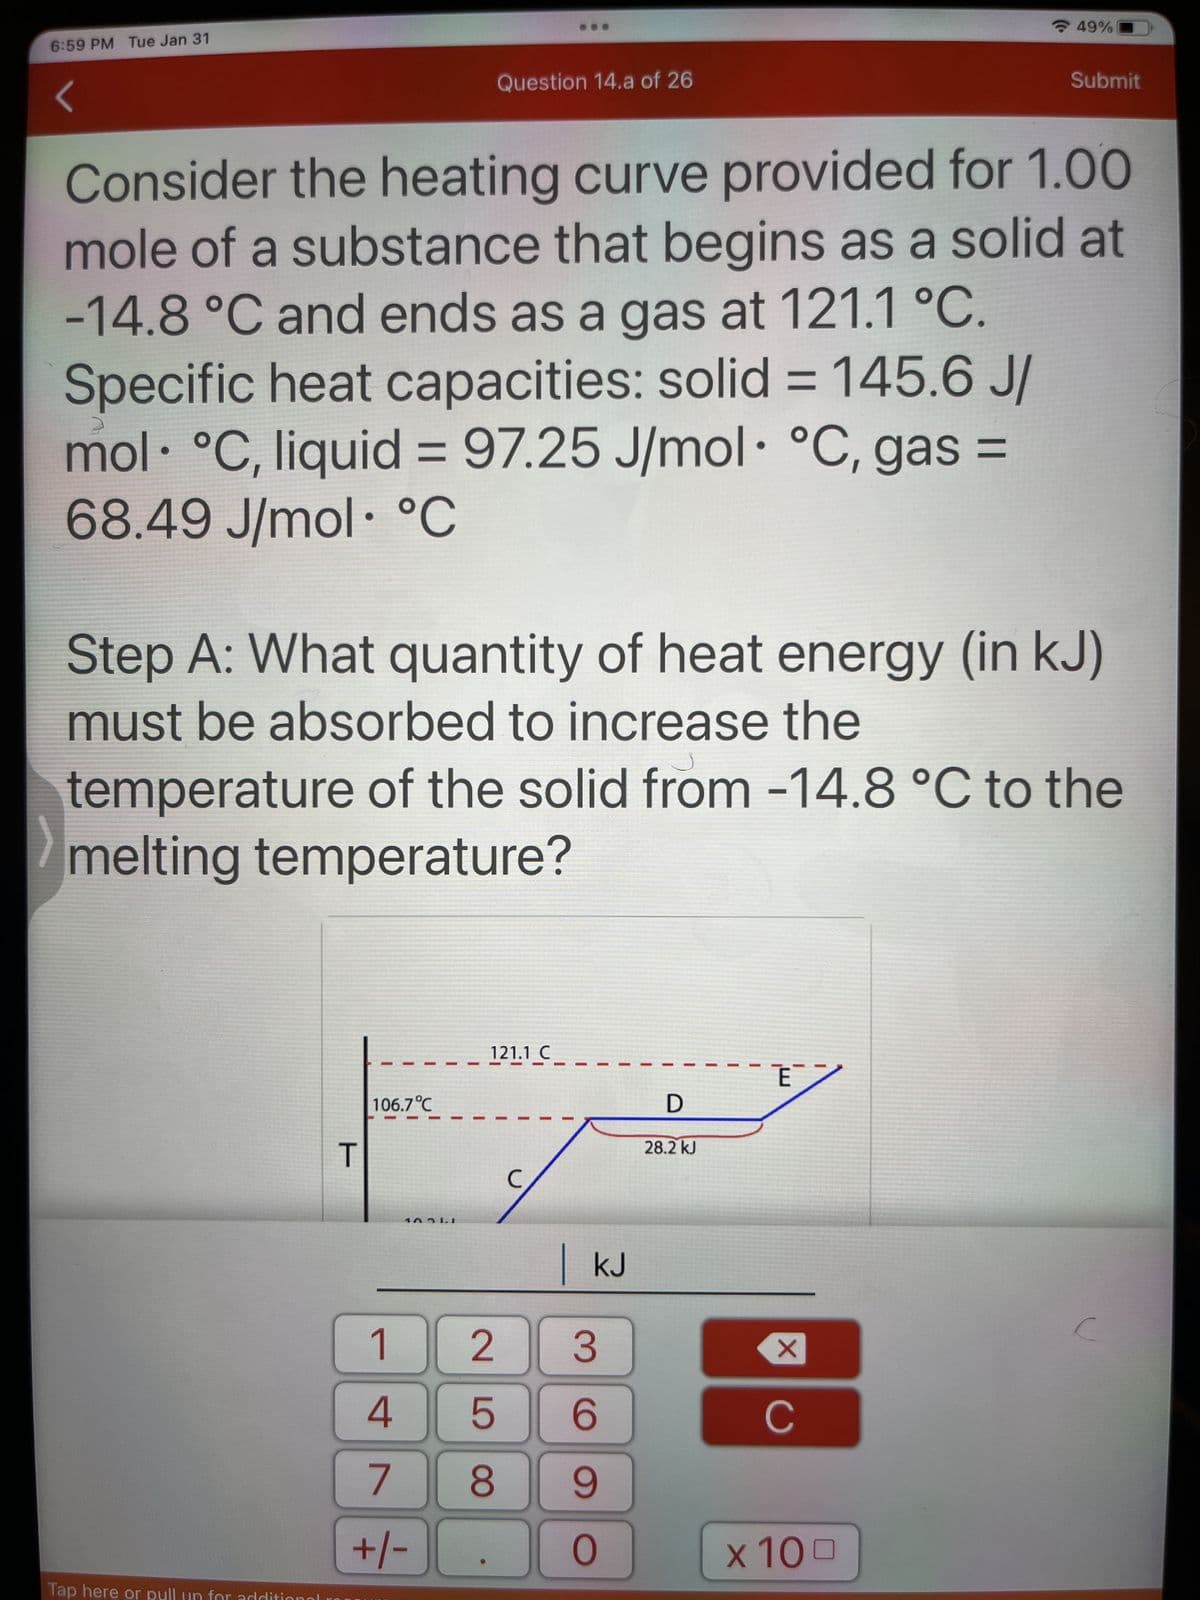 Pension
6:59 PM Tue Jan 31
Consider the heating curve provided for 1.00
mole of a substance that begins as a solid at
-14.8 °C and ends as a gas at 121.1 °C.
Specific heat capacities: solid = 145.6 J/
mol °C, liquid = 97.25 J/mol °C, gas =
68.49 J/mol °C
Tap here or pull for addi
Step A: What quantity of heat energy (in kJ)
must be absorbed to increase the
T
temperature of the solid from -14.8 °C to the
melting temperature?
106.7°C
Question 14.a of 26
10311
1
4
7
+/-
121.1_C
258
с
KJ
3
6
9
O
D
28.2 kJ
E
49%
X
Submit
C
x 100